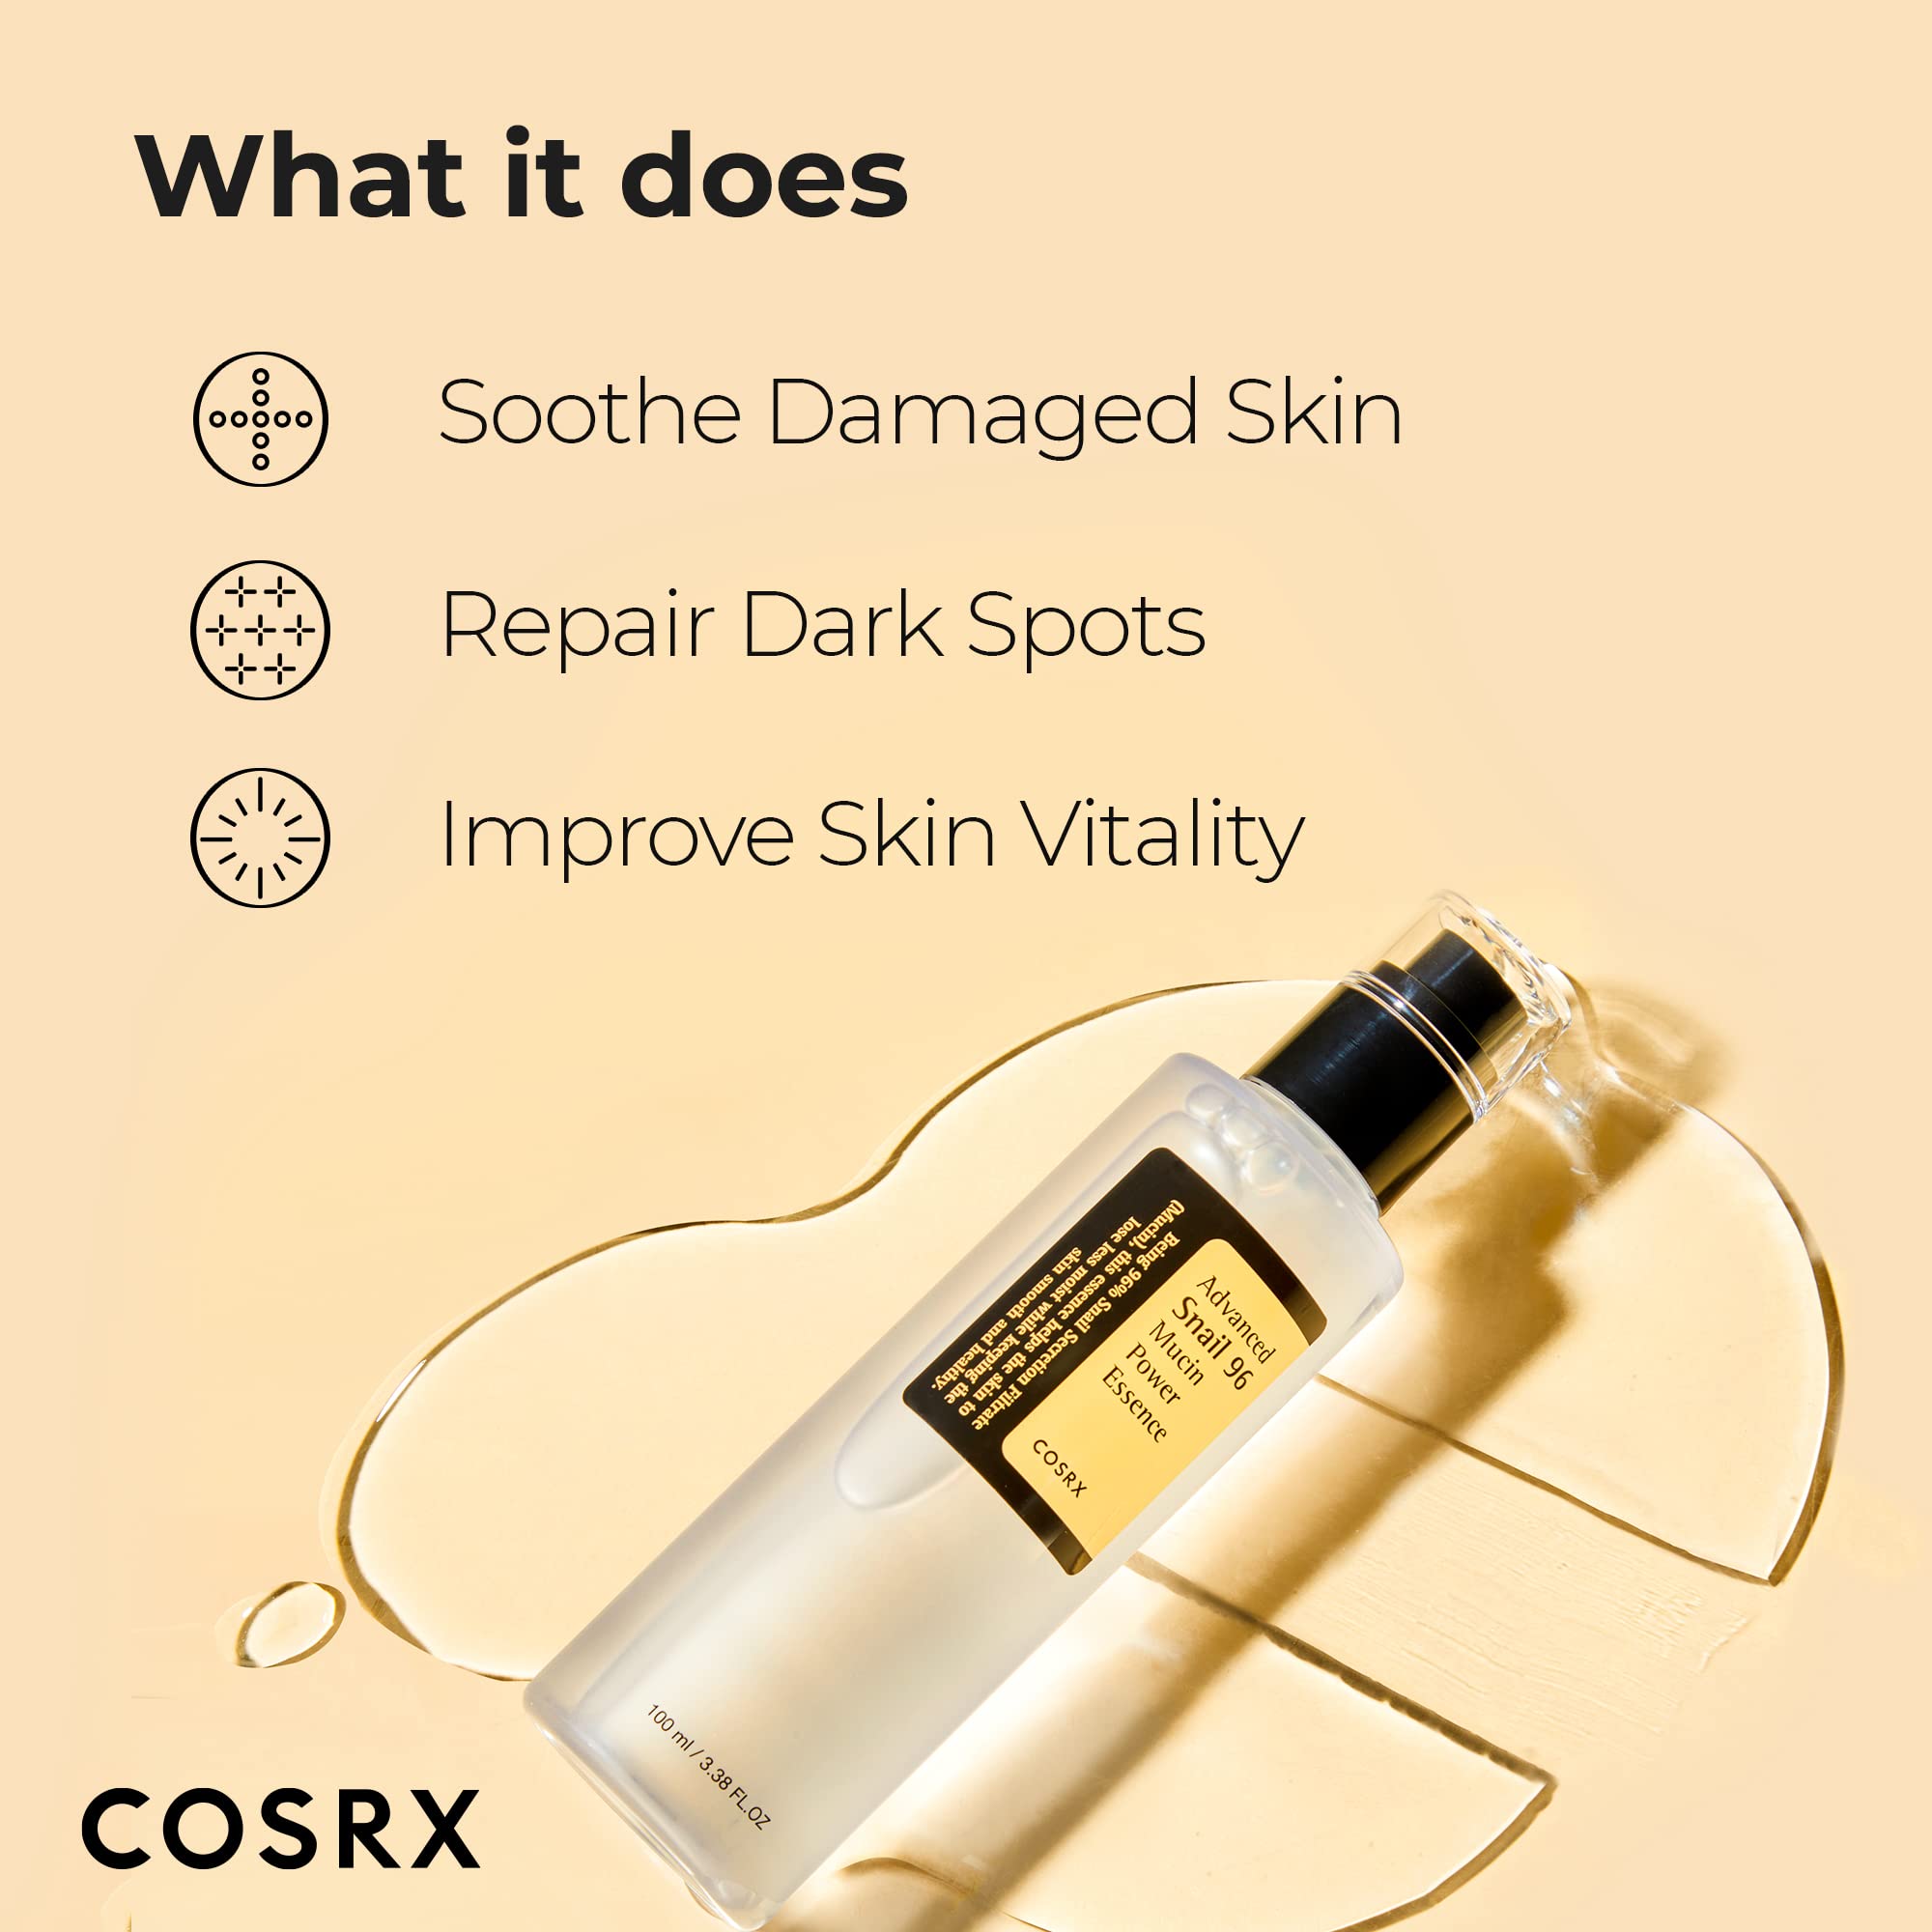 COSRX Snail Mucin 96% Power Repairing Essence 3.38 fl.oz 100ml, Hydrating Serum for Face with Snail Secretion Filtrate for Dull & Damaged Skin, Not Tested on Animals, No Parabens, Korean Skincare